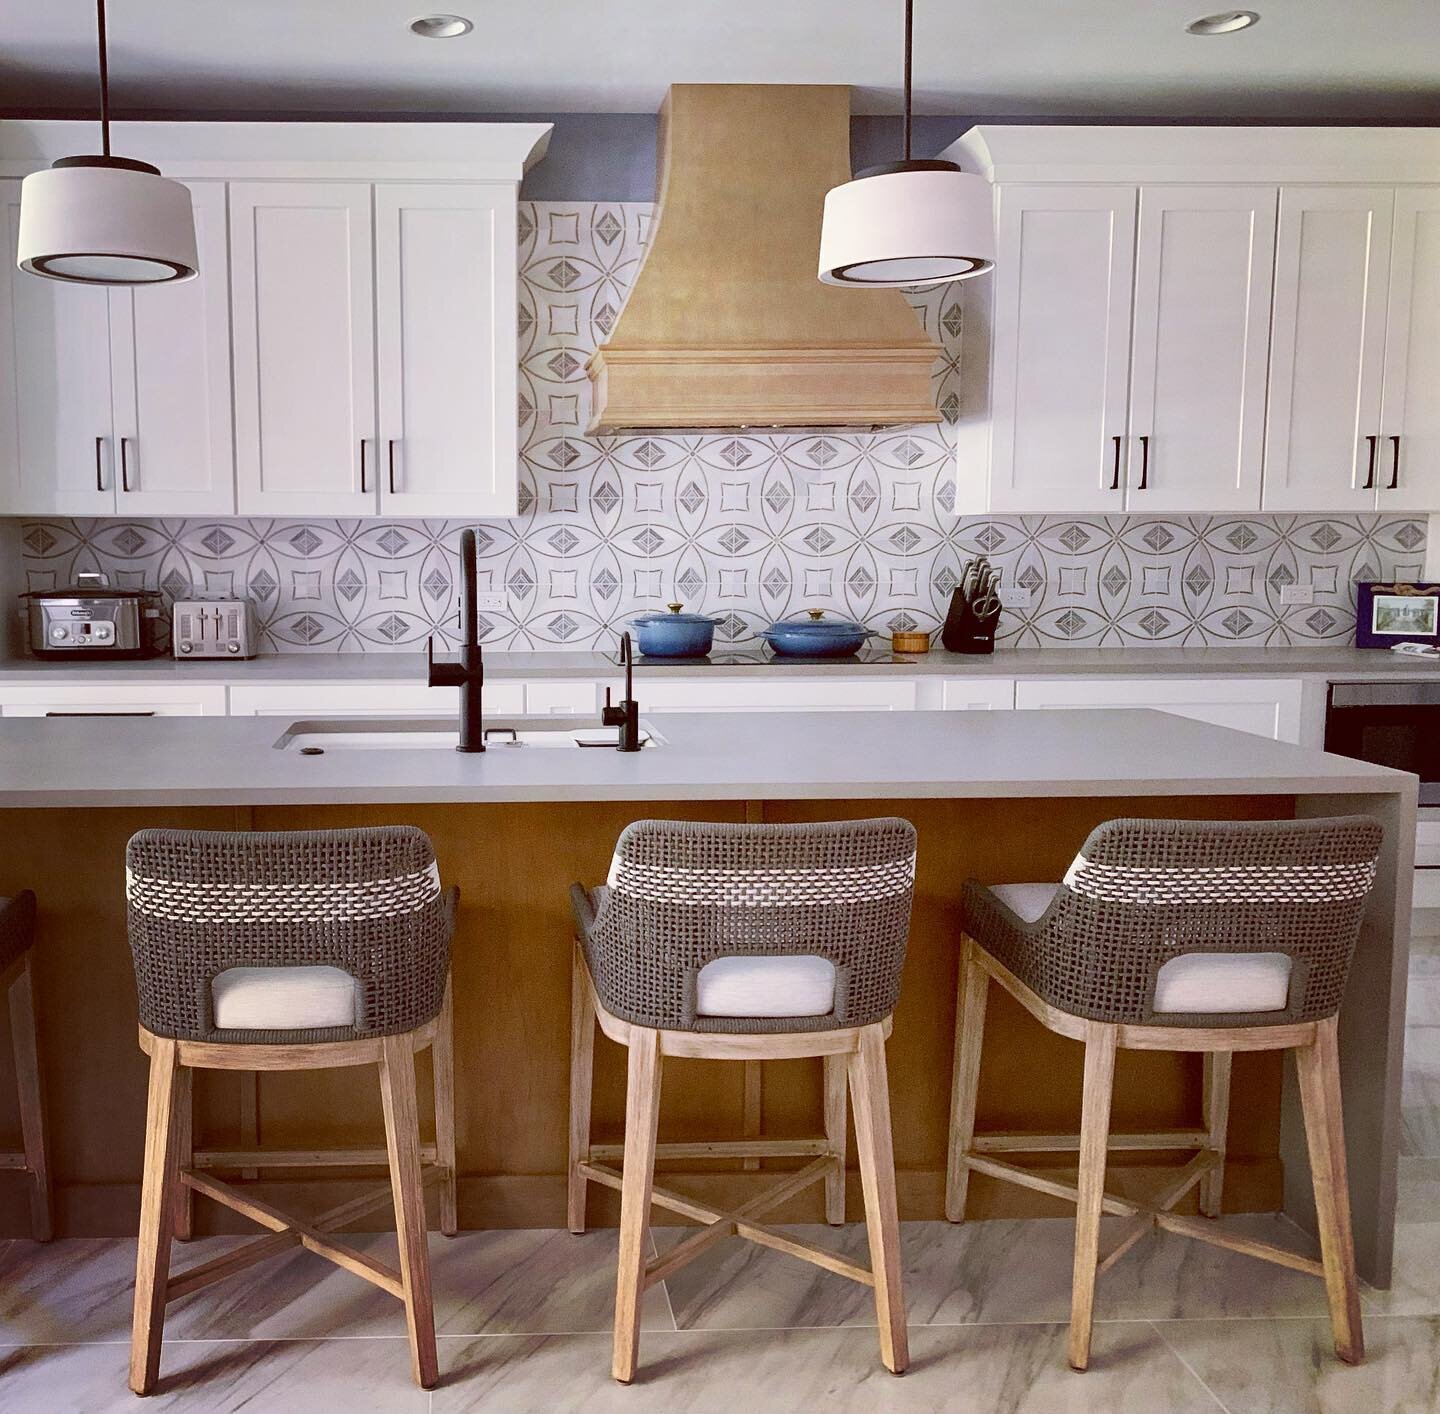 Dying to share these beautiful counter stools that we delivered yesterday, they are just awesome in every way! #annkottlerhome #kitchendesign #kitchenfurniture #islandseating #interiordesign #essentialsforliving #countryclubestatesclient